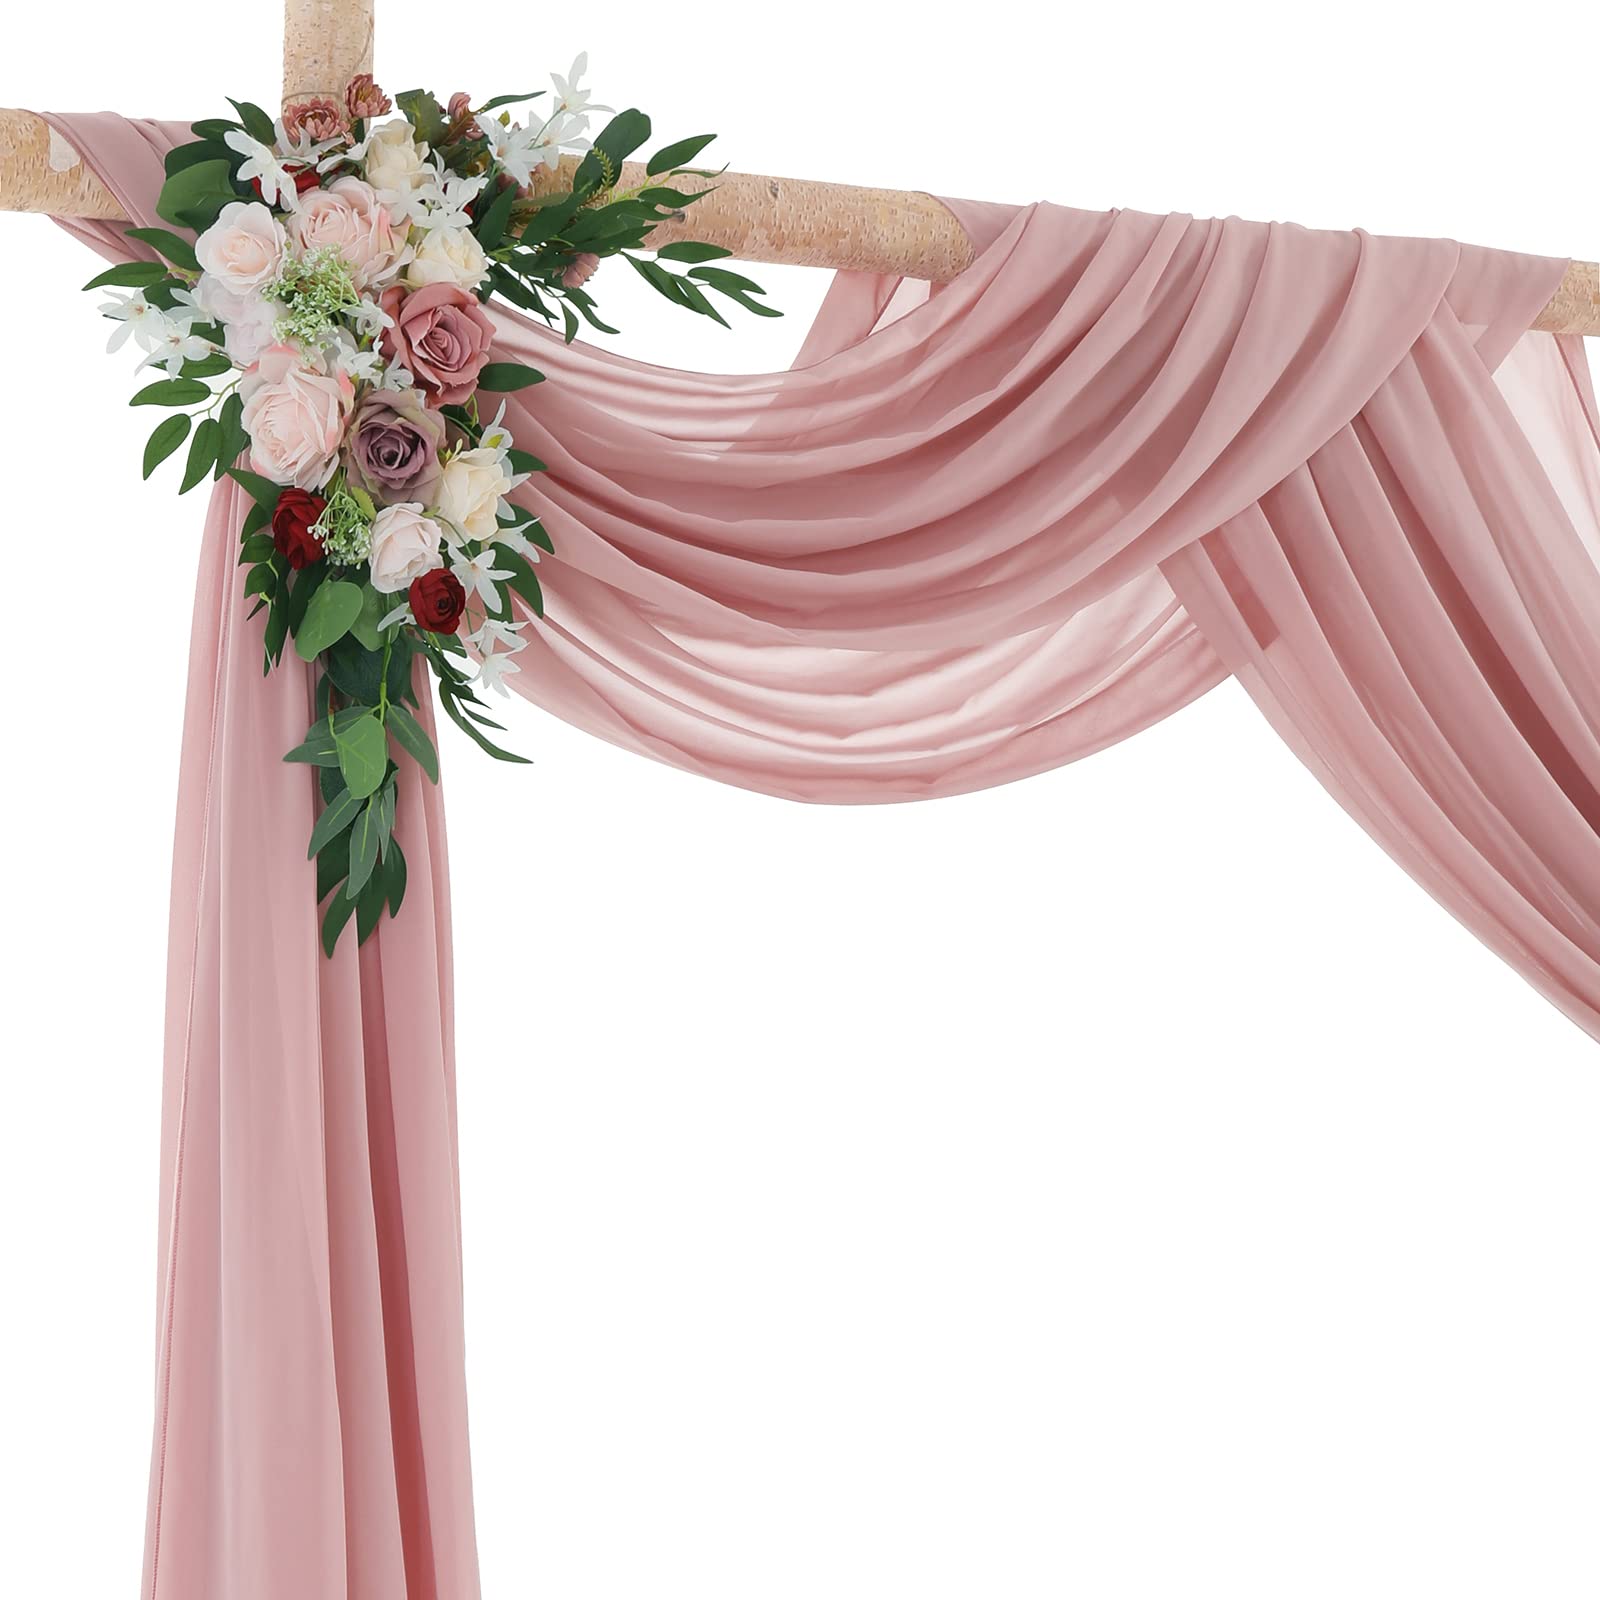 MoKoHouse Wedding Arch Drapes Fabric Dusty Rose 3 Panels 6 Yards Sheer Backdrop Wedding Decor for Party Ceremony Stage Reception